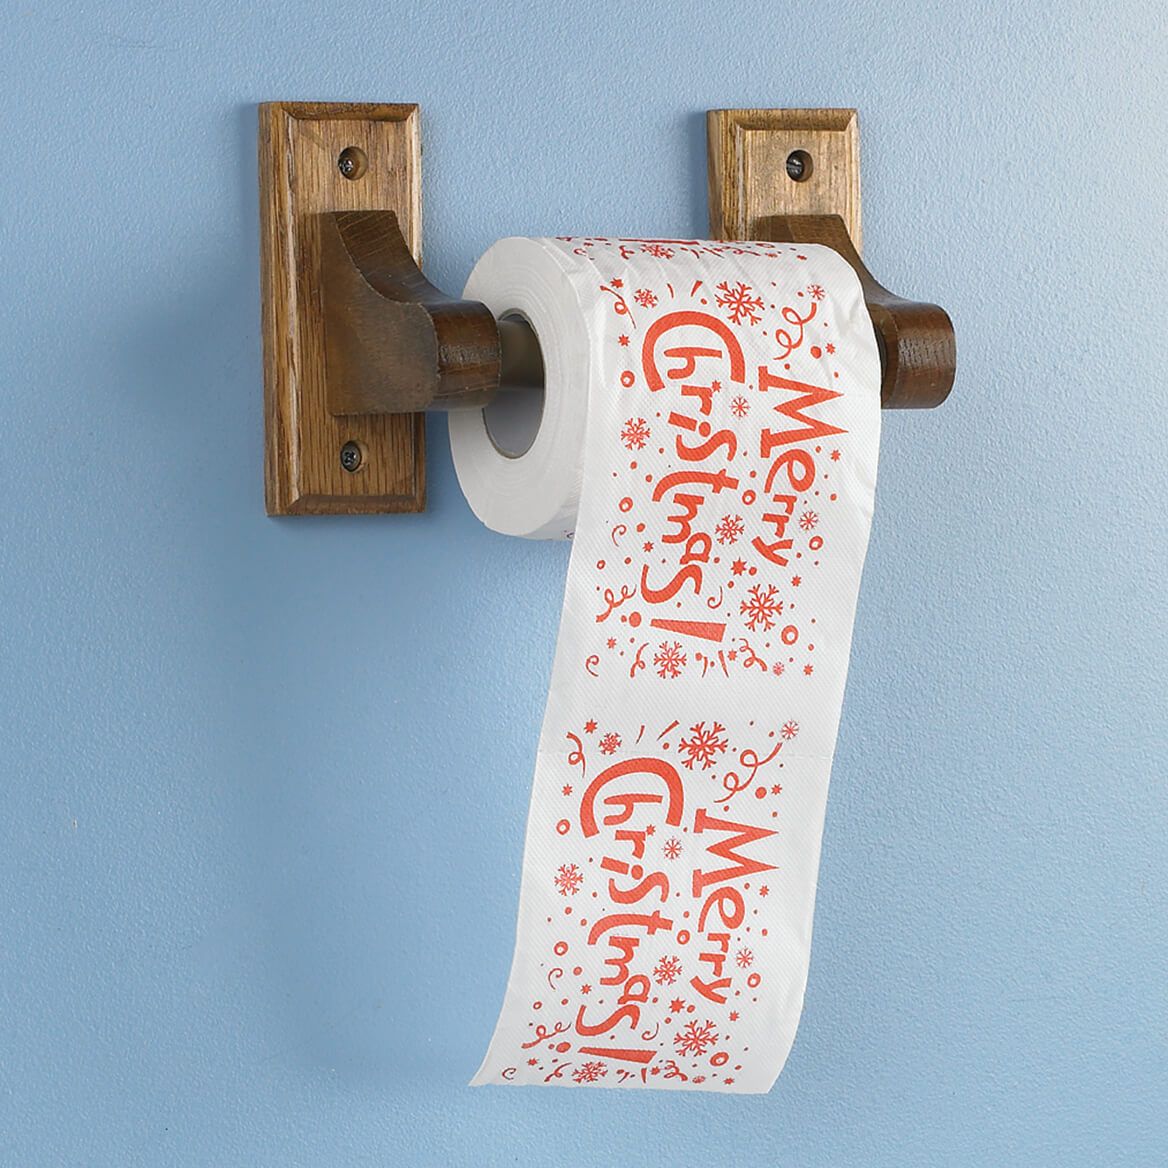 Merry Christmas 3 Layer Toilet Paper Roll + '-' + 375286